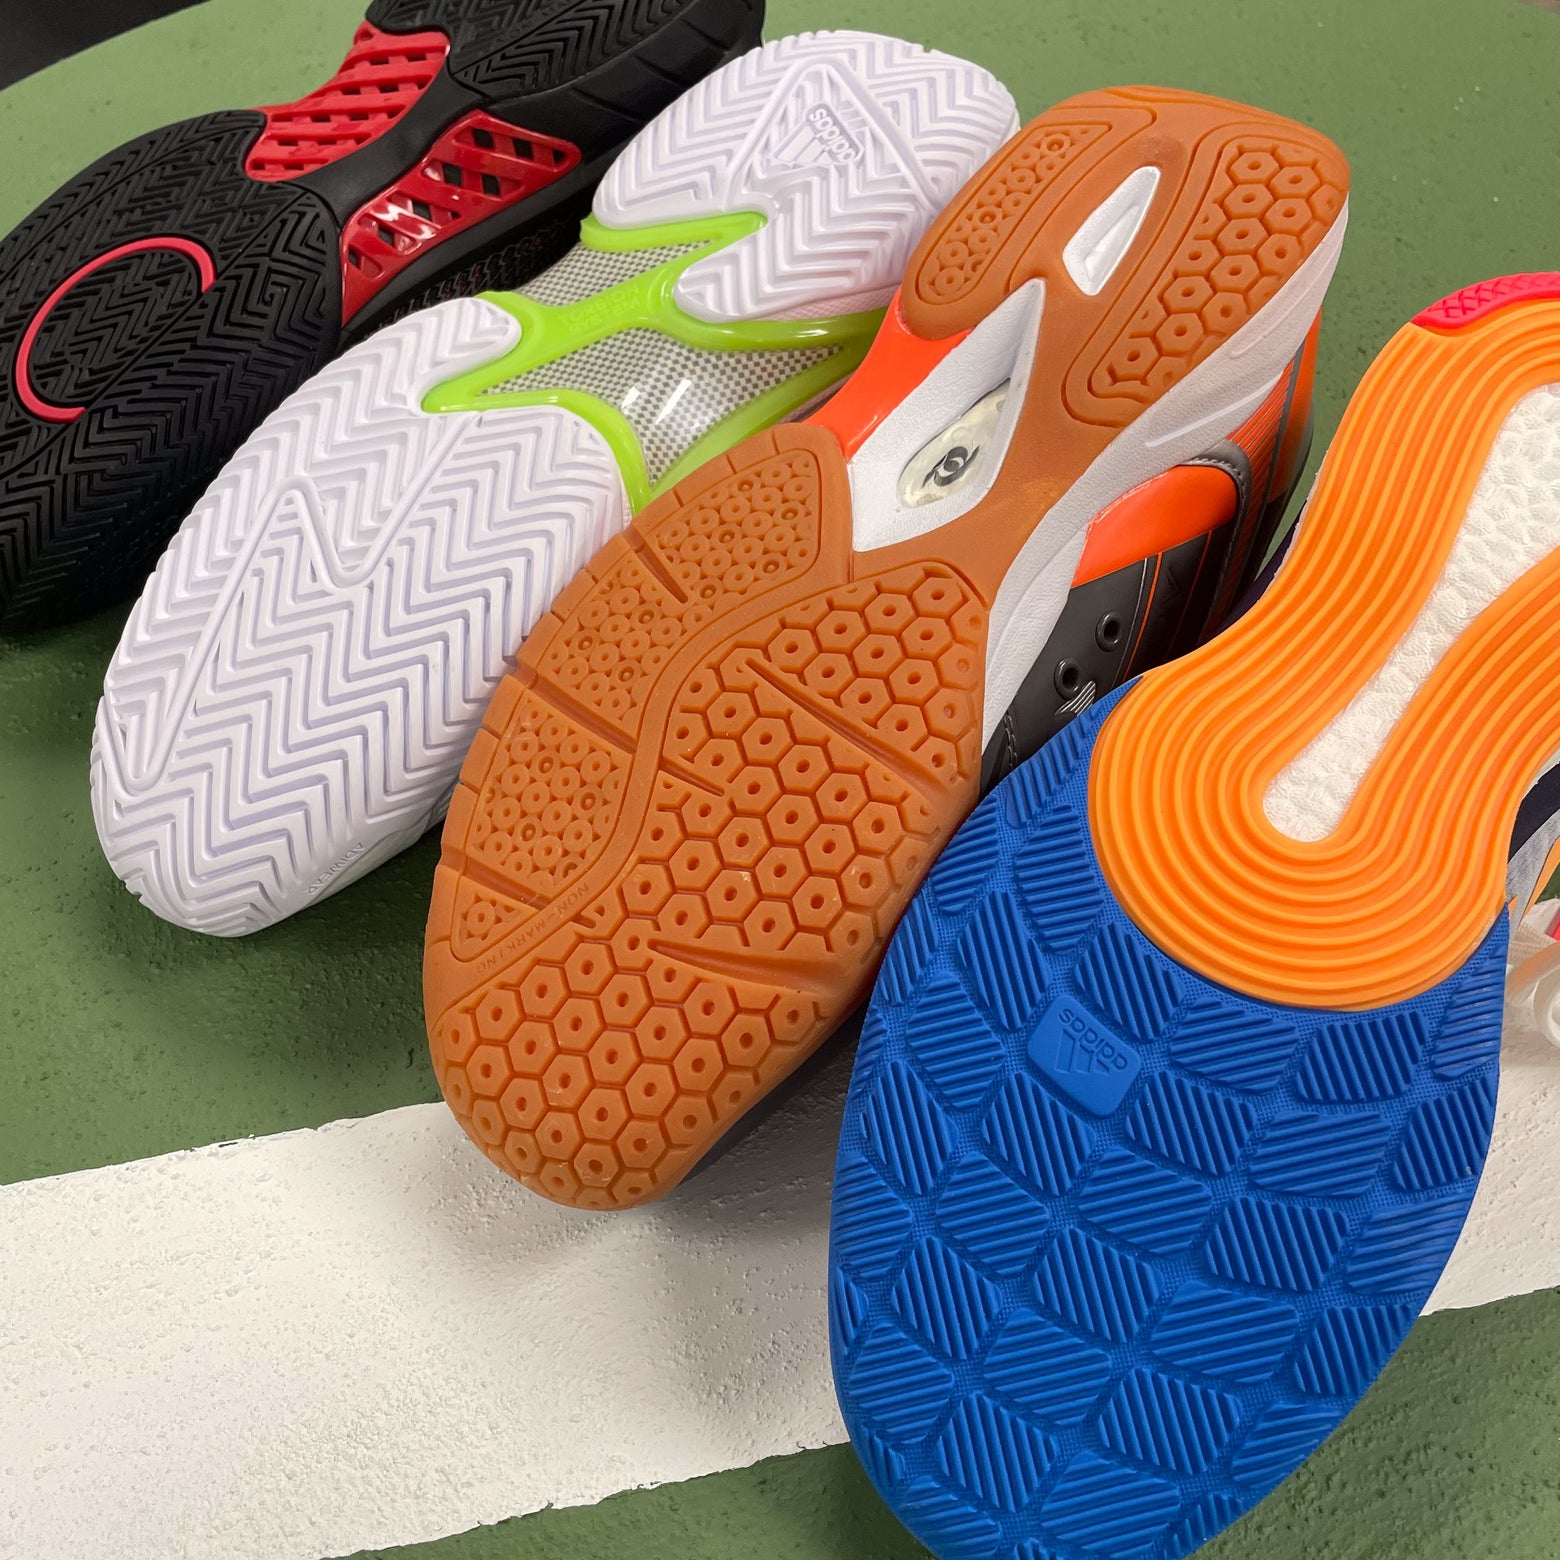 How to Choose Your Next Pickleball Shoes